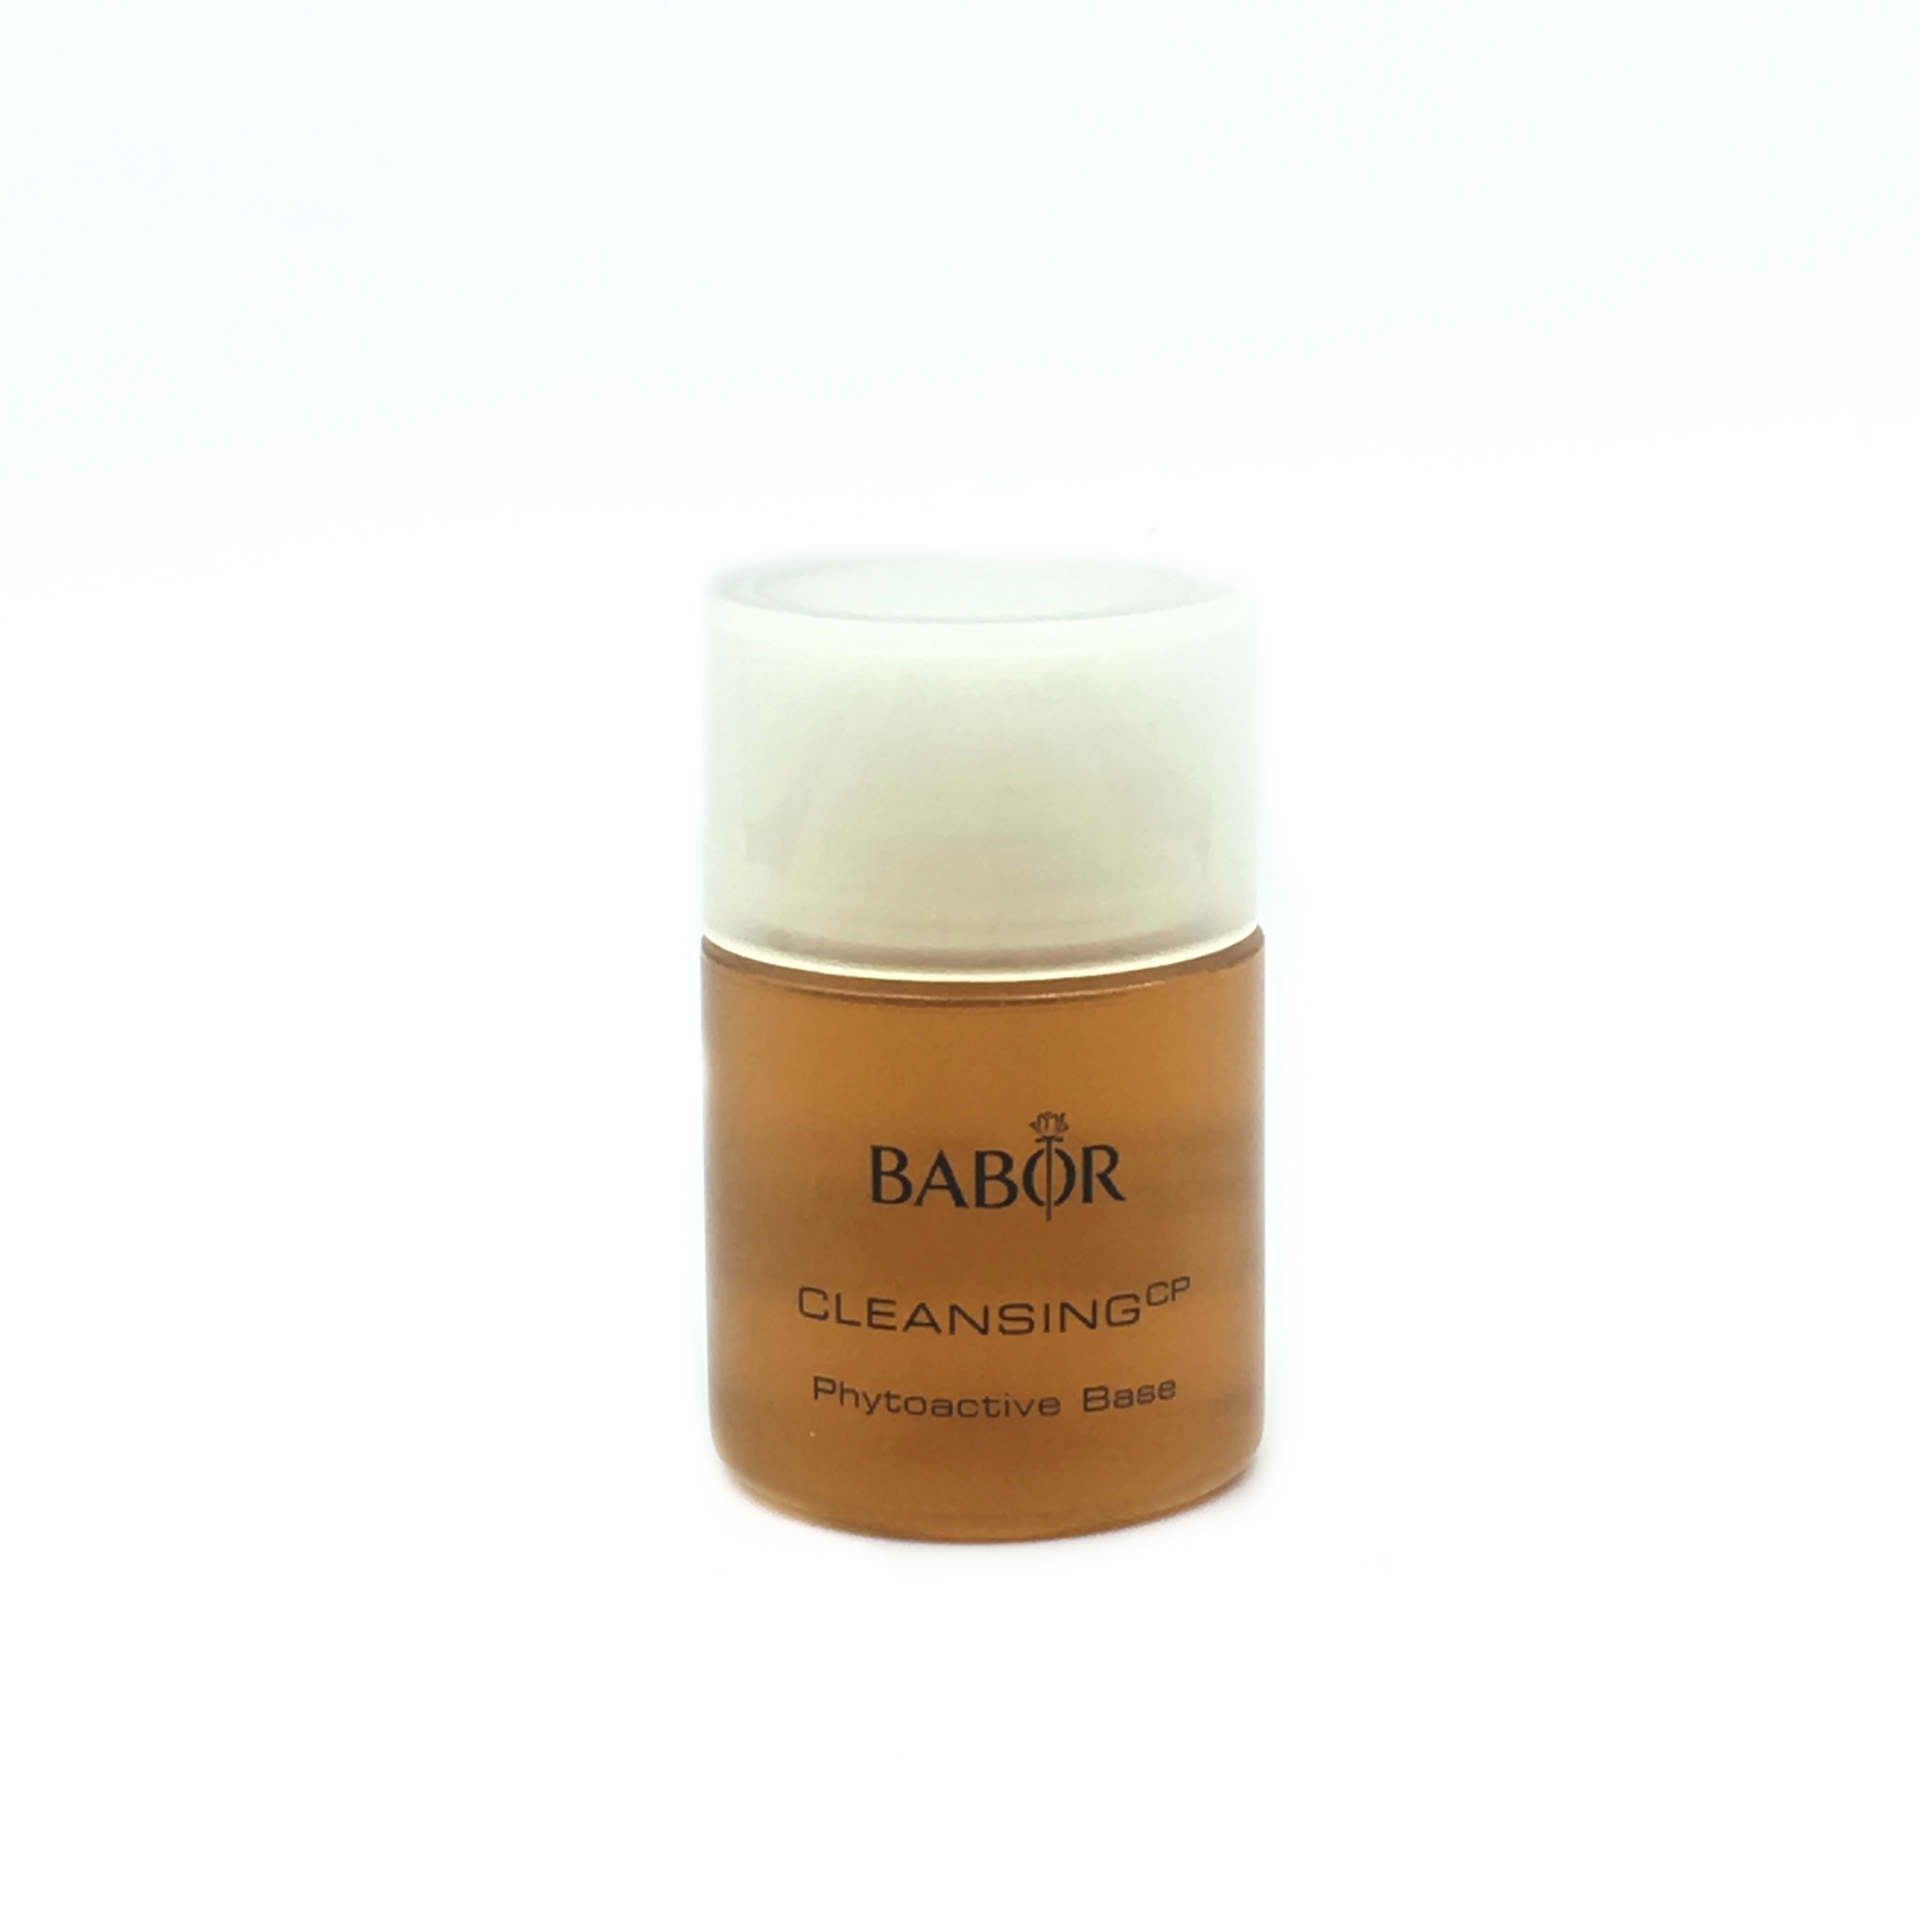 Babor Cleansing Phytoactive Base Skin Care